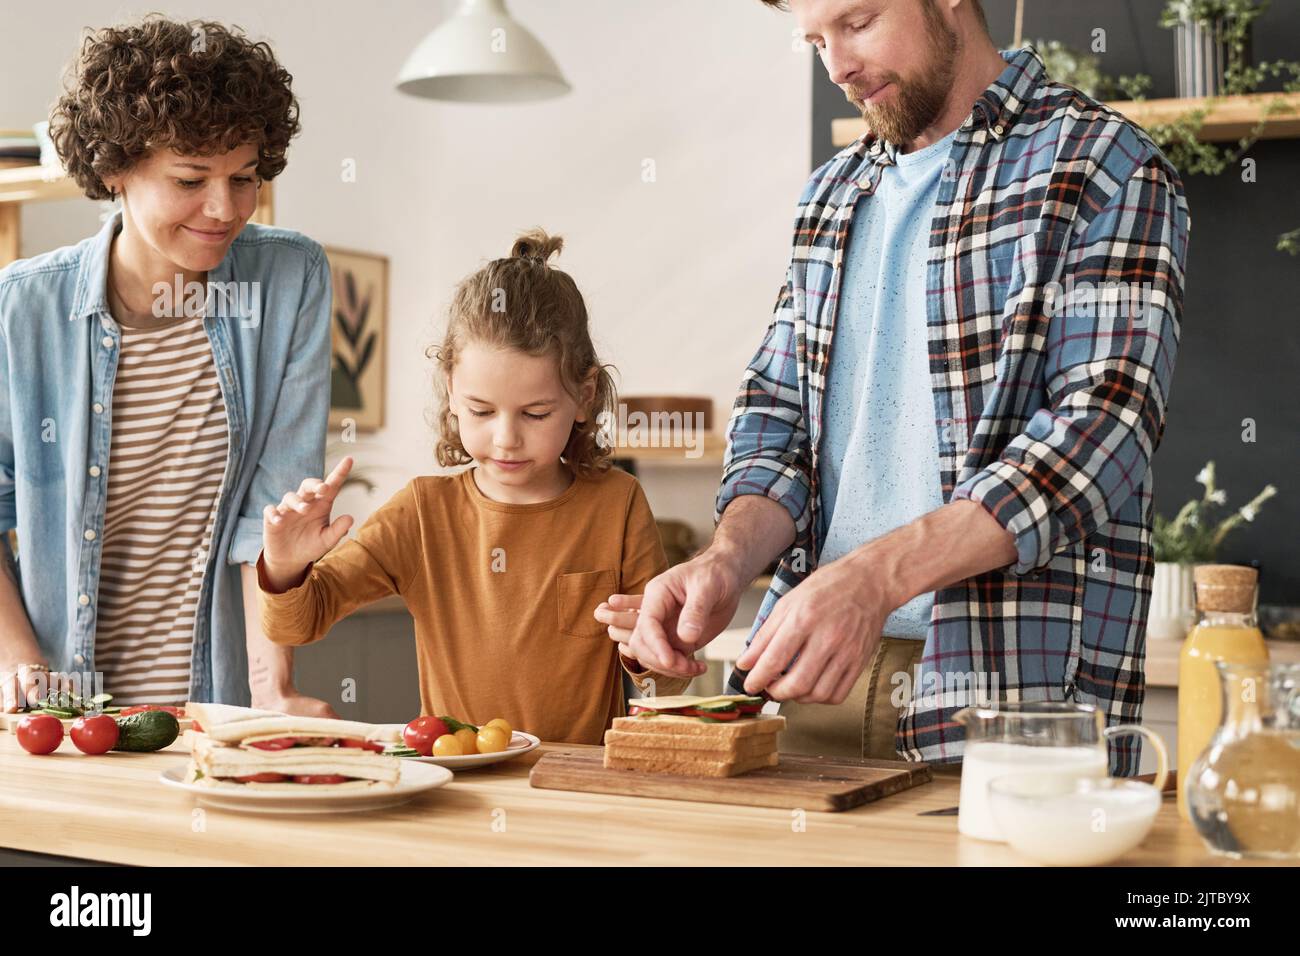 Little boy helping his parents to cook sandwiches with vegetables at table in domestic kitchen Stock Photo